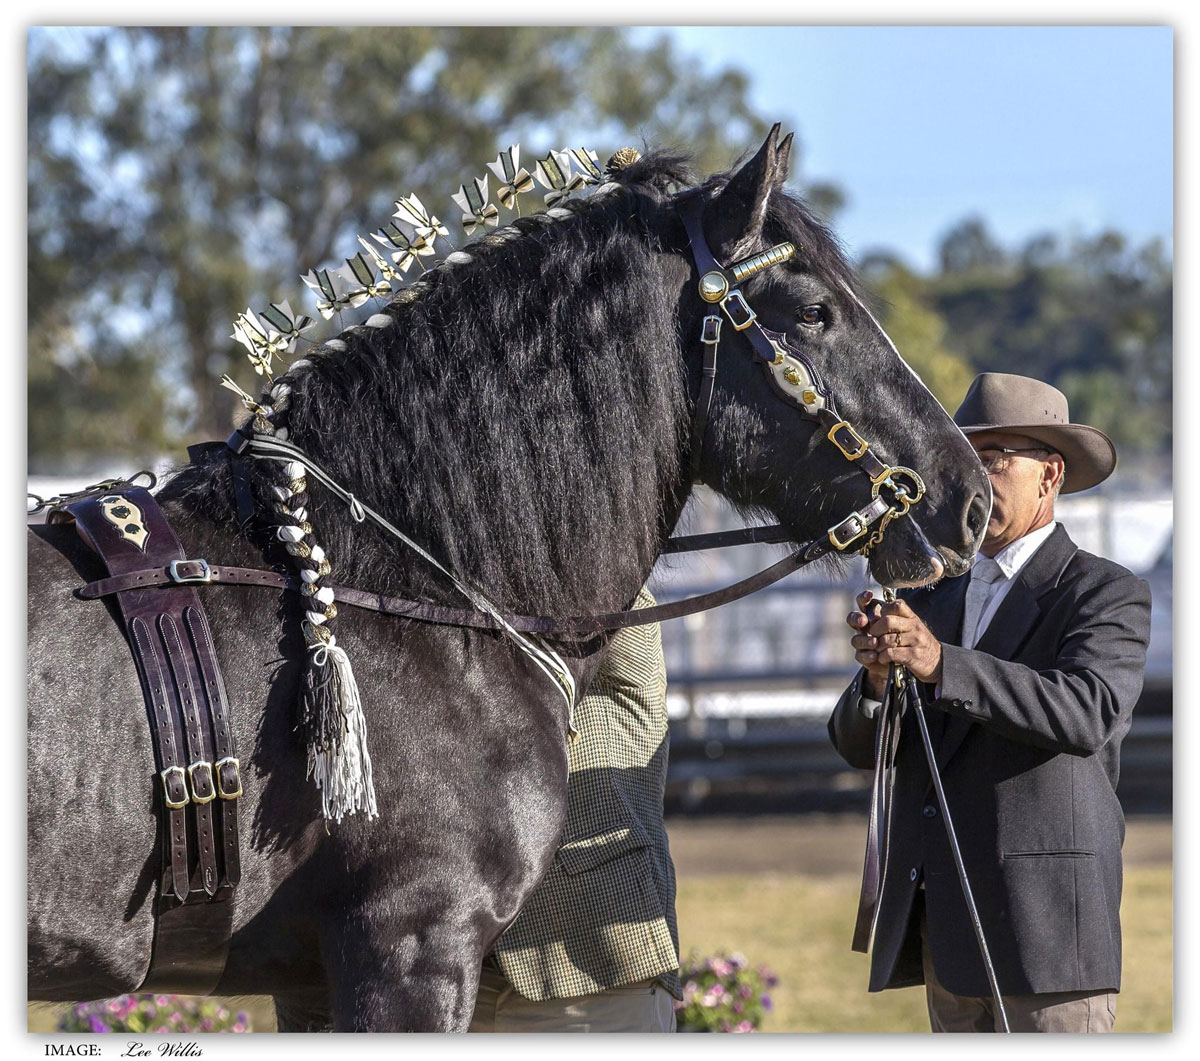 Drayhorse King of Spades Uk and shire horse Society Australia fully approved black shire stallion King is sired by Ddrydwy drayhorse ace of spades Uk premium stallion.